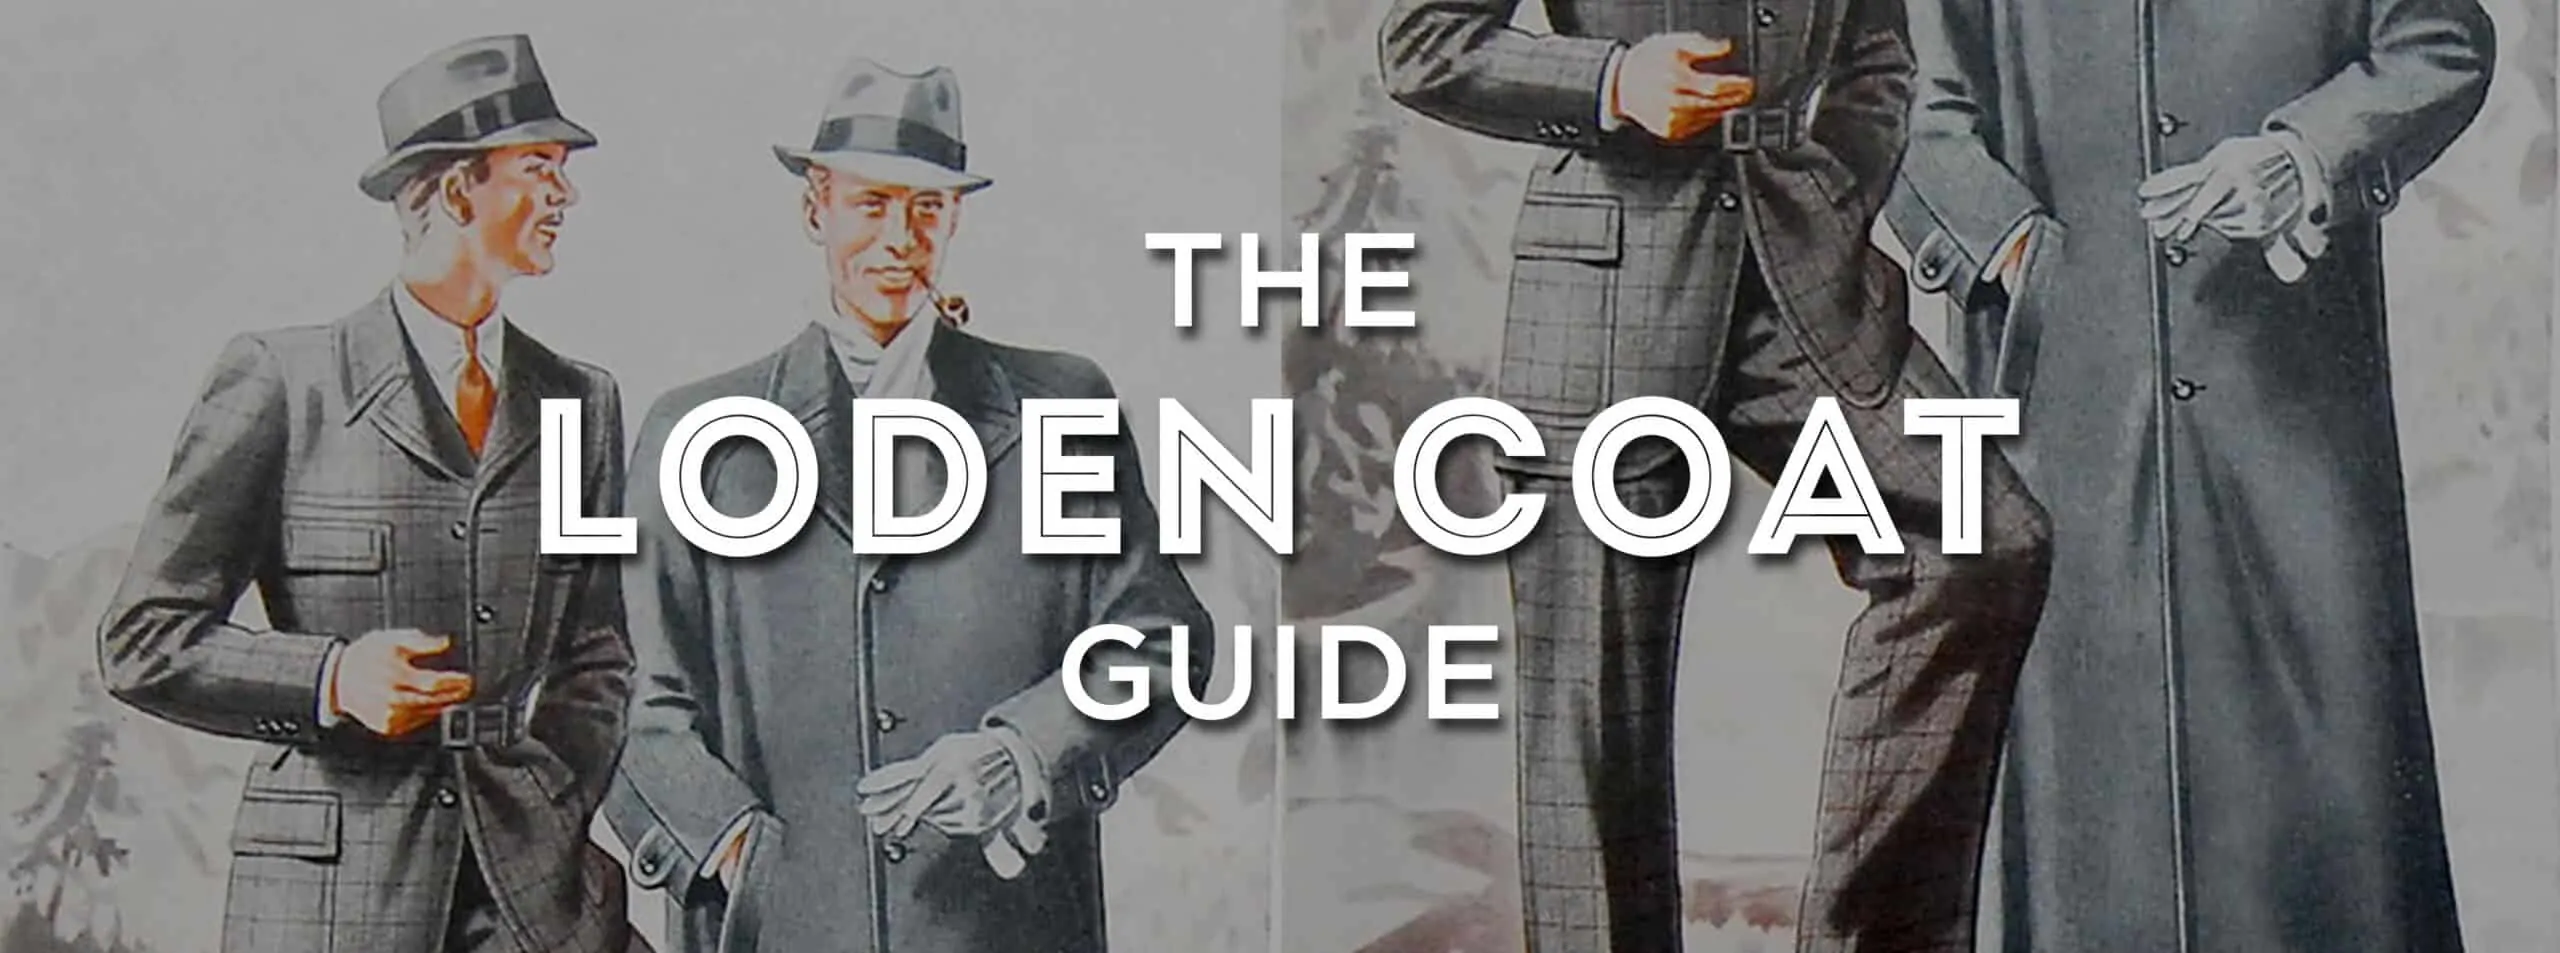 loden coat guide 3870x1440 scaled